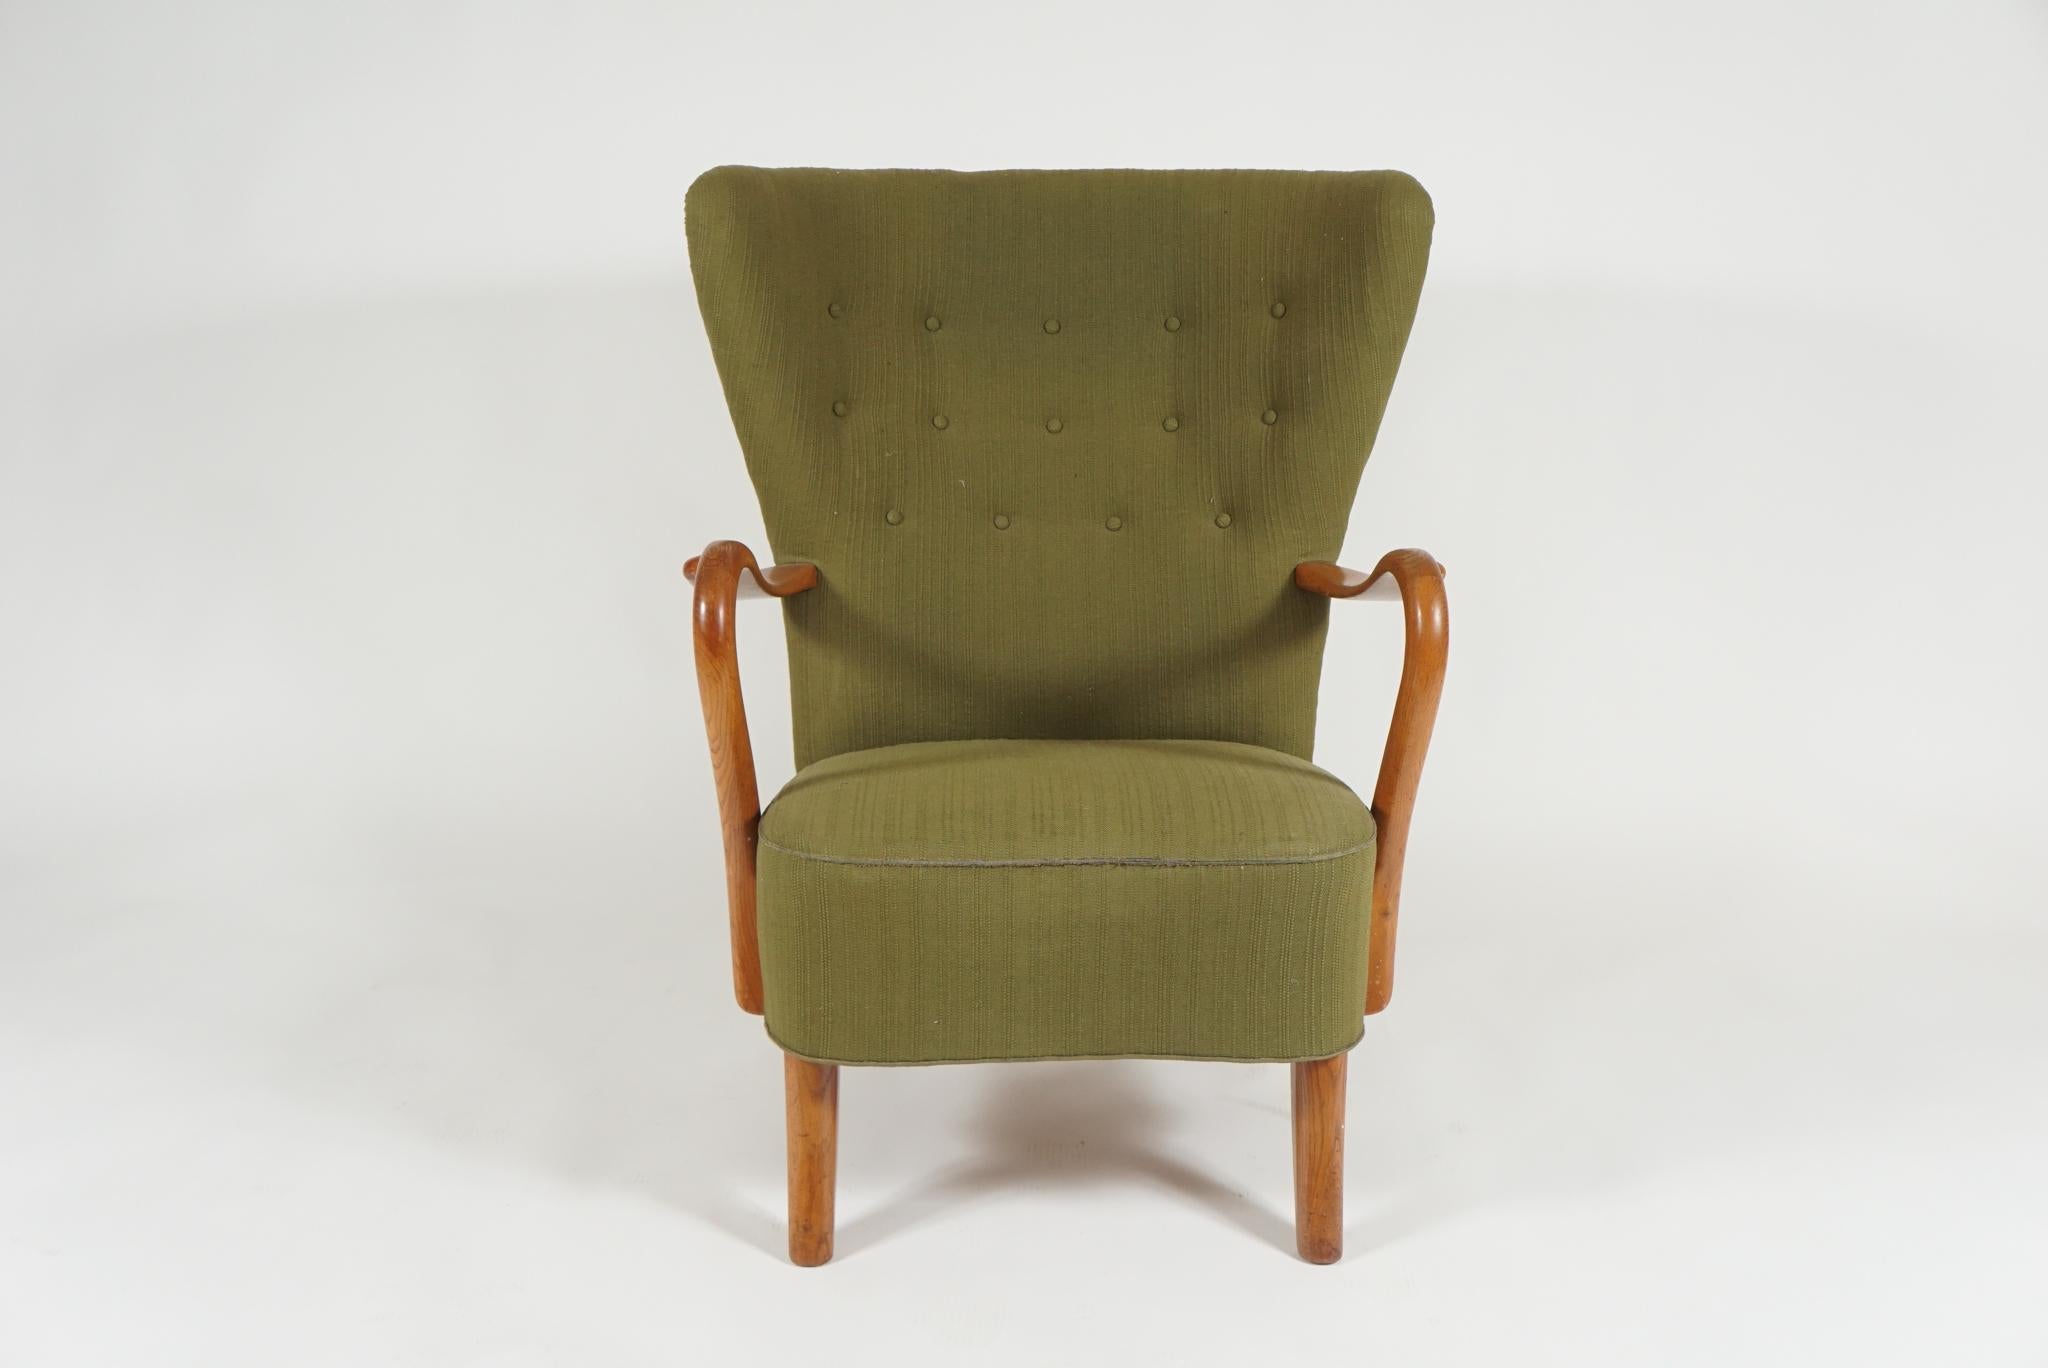 Danish 1940s open armchair with beechwood frame. This extremely comfortable chair is by designer Alfred Christensen.